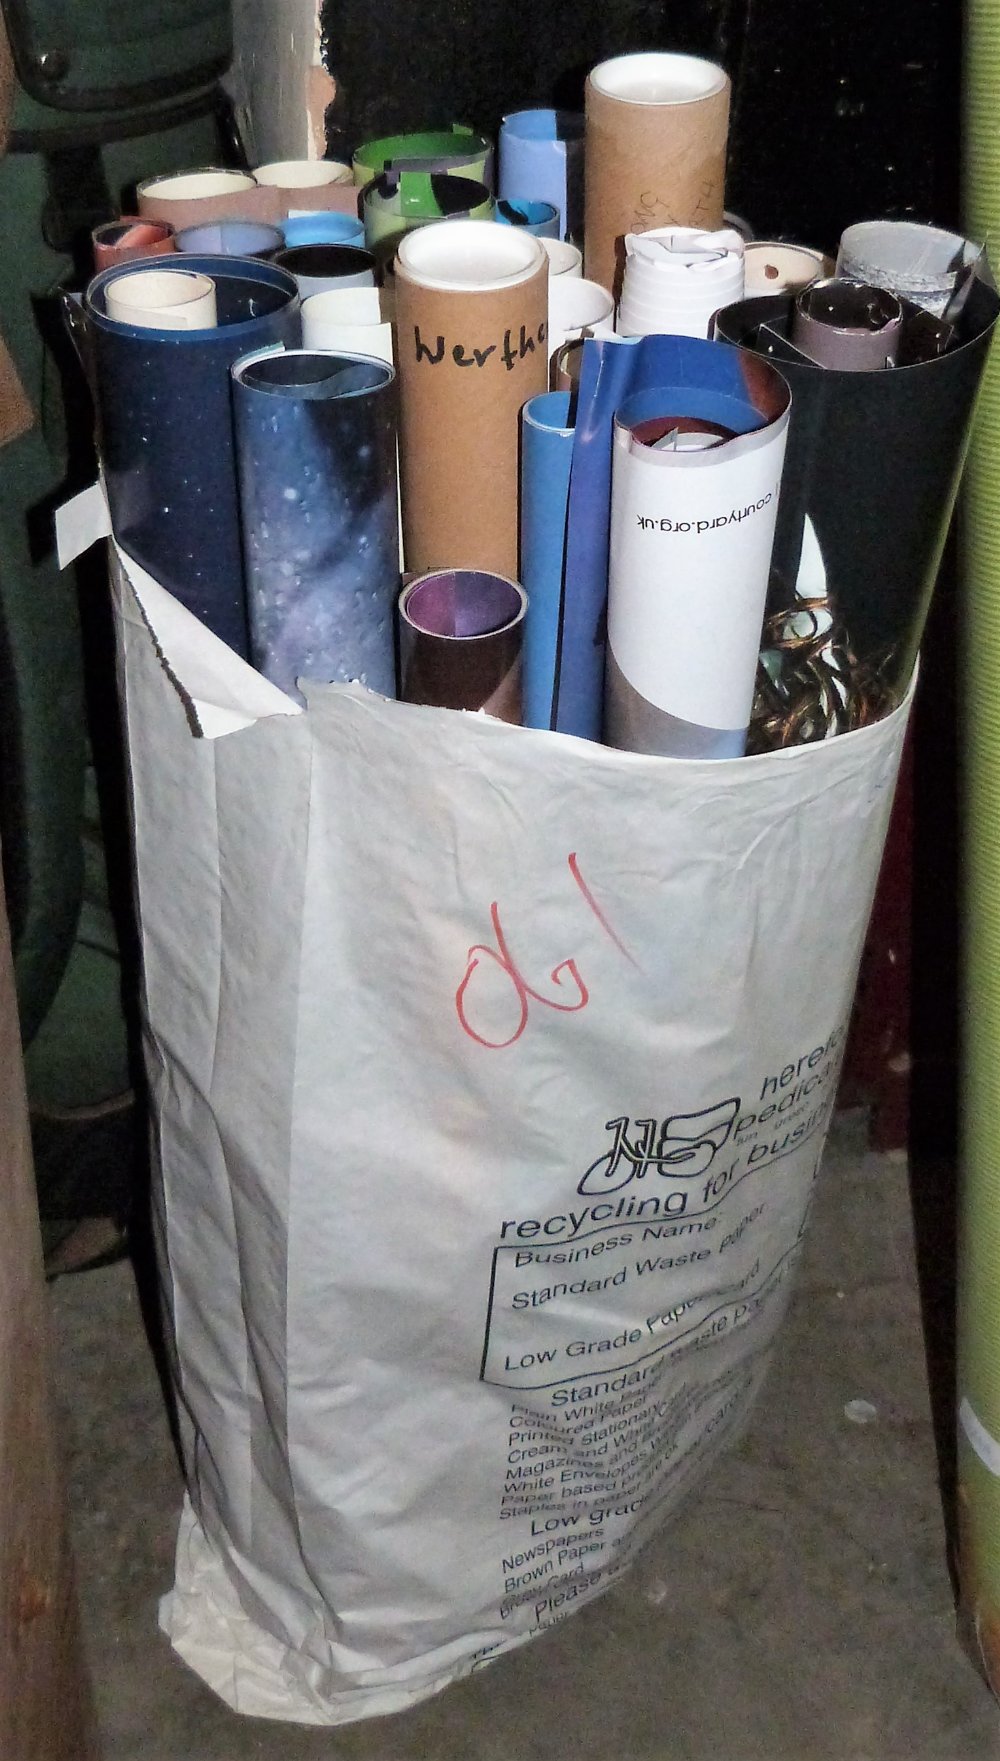 A quantity of posters